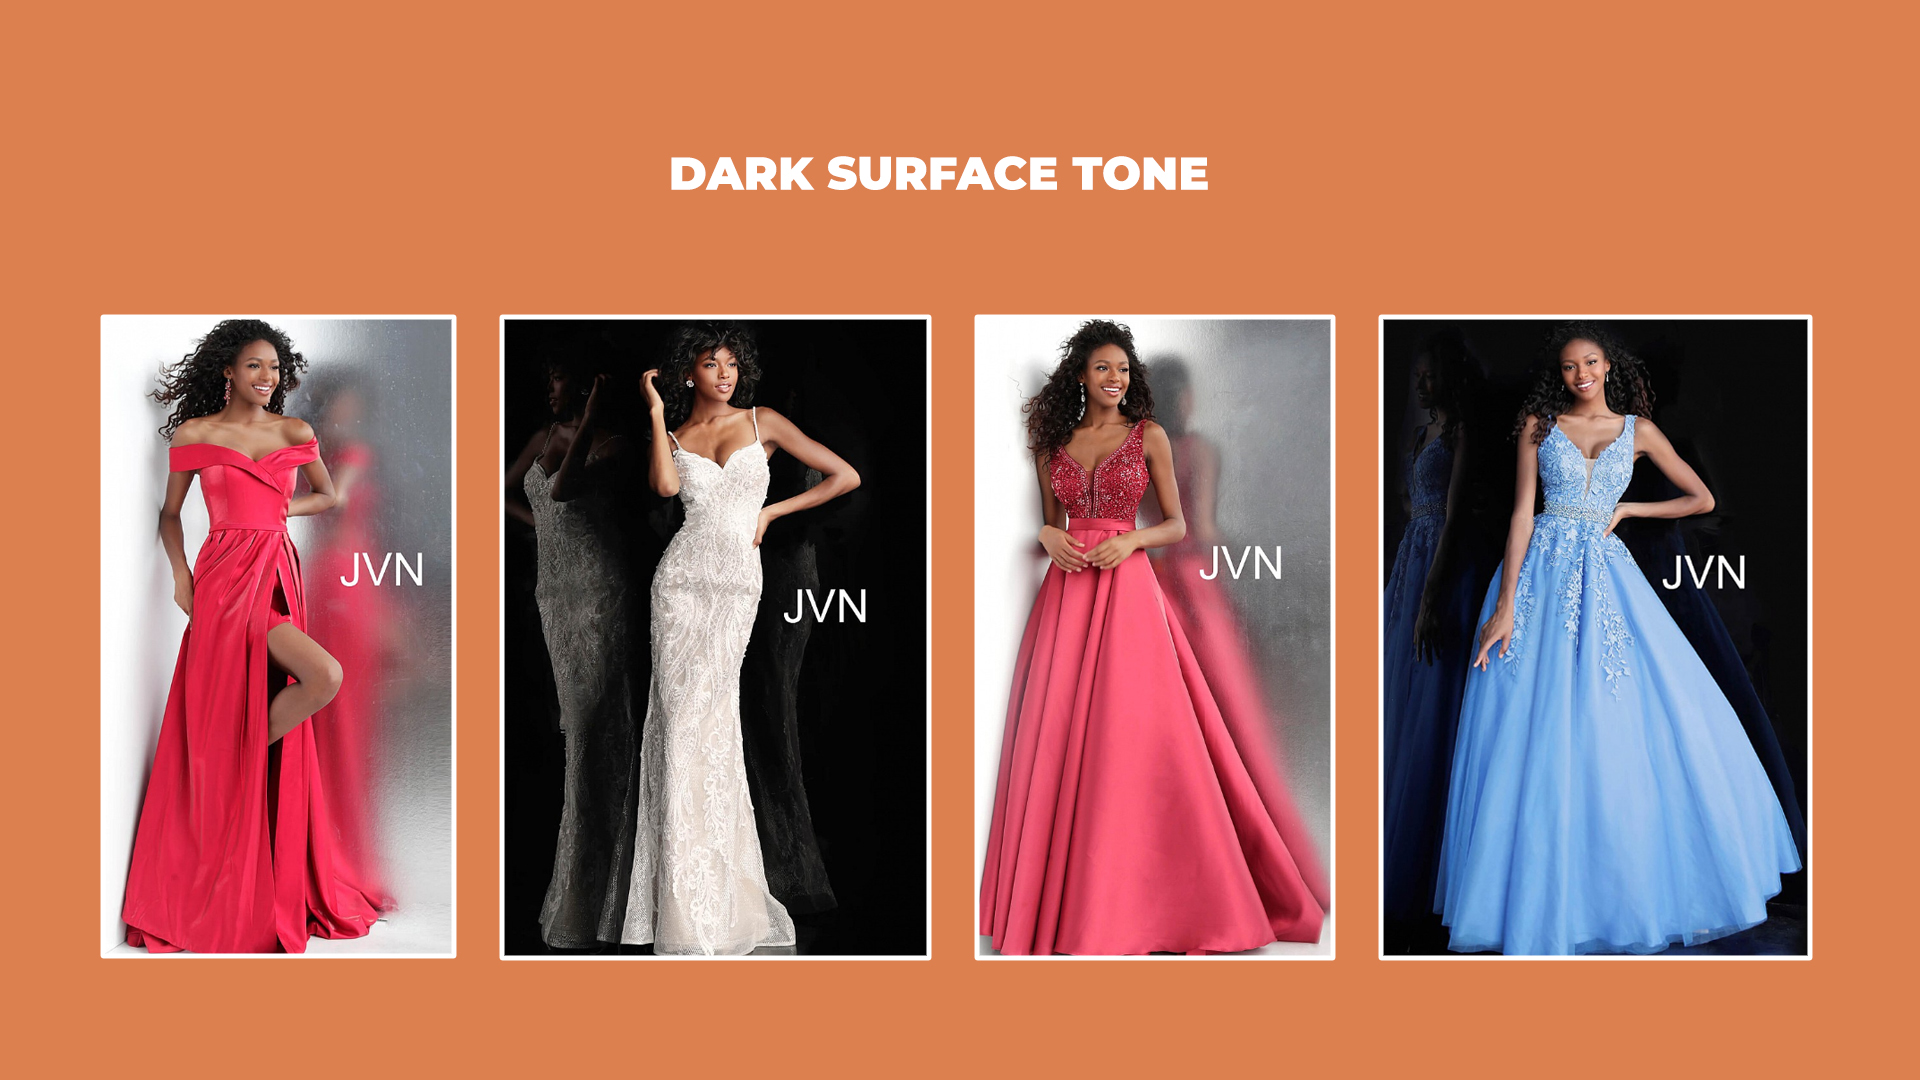 How to choose the color of your prom dress